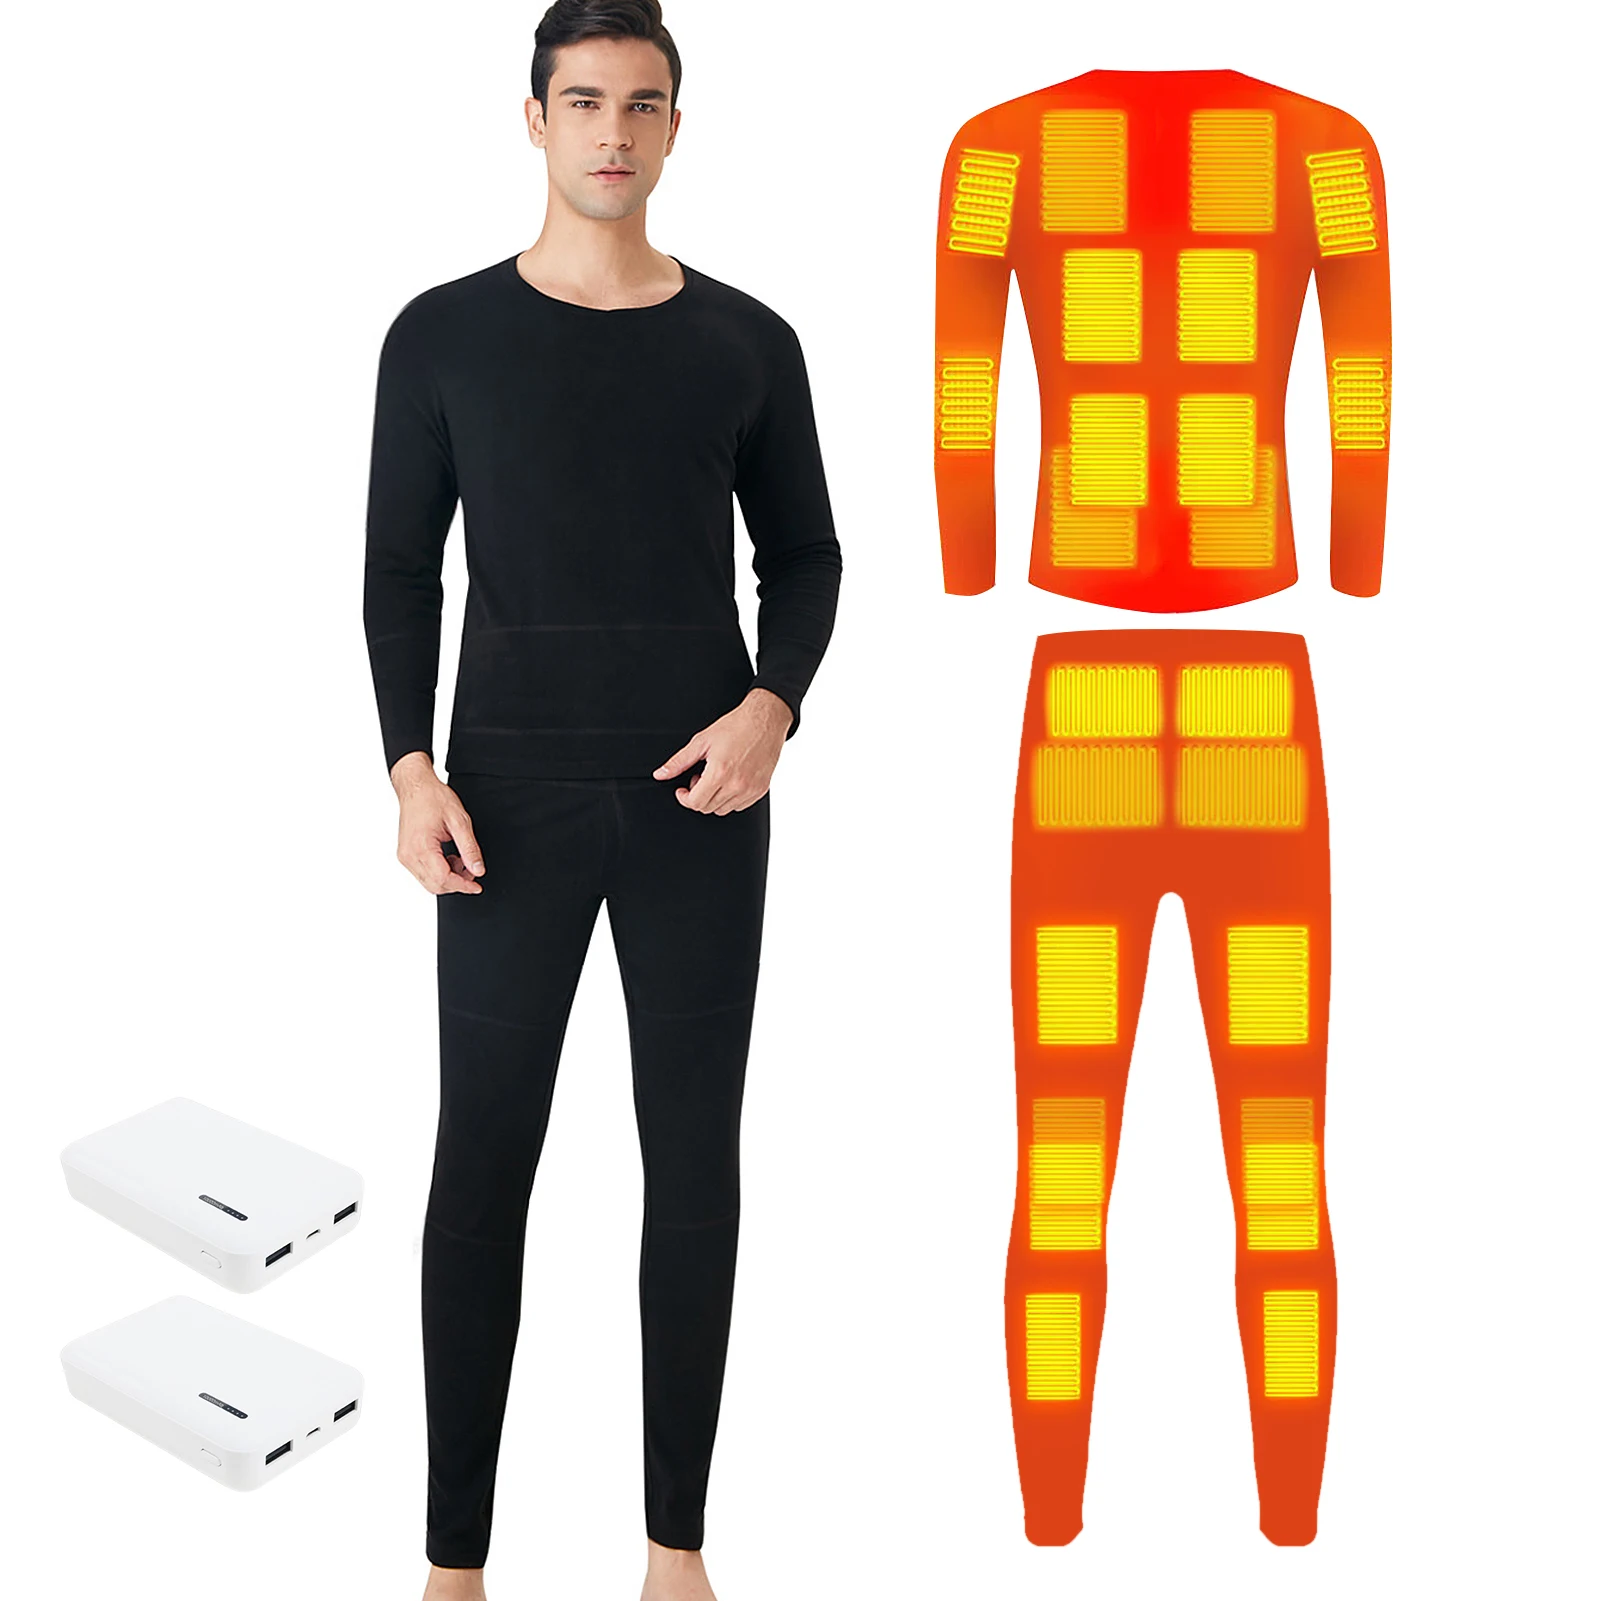 Winter Heated Underwear Unisex Warm 24 Areas Electric USB Heated Heating Shirt and Pants Set with 5 Temperature Settings